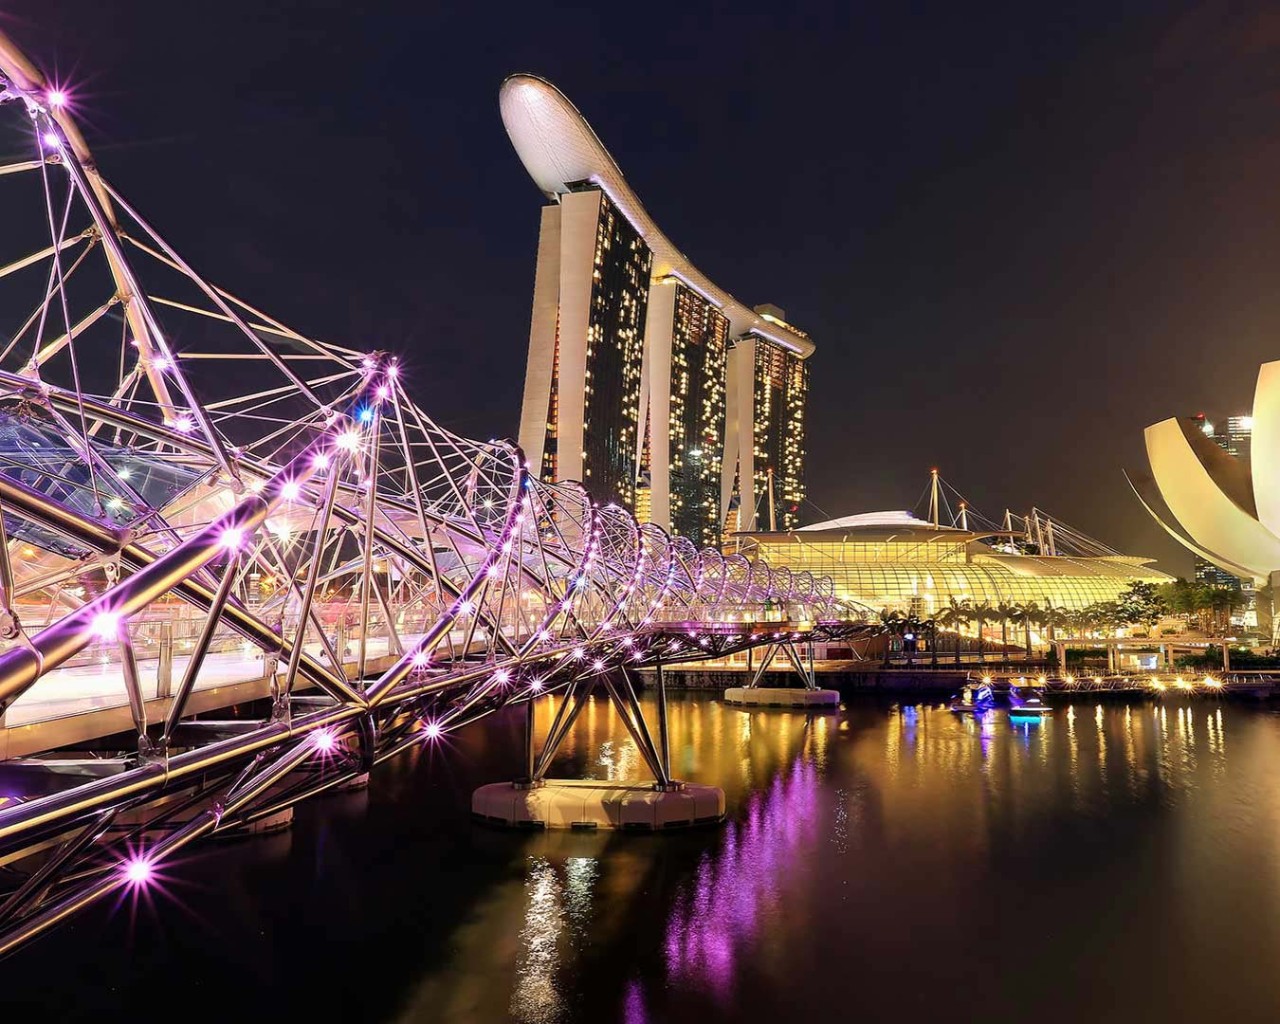 Night view in Singapore along the Helix Bridge with Marina Bay Sands as the backdrop